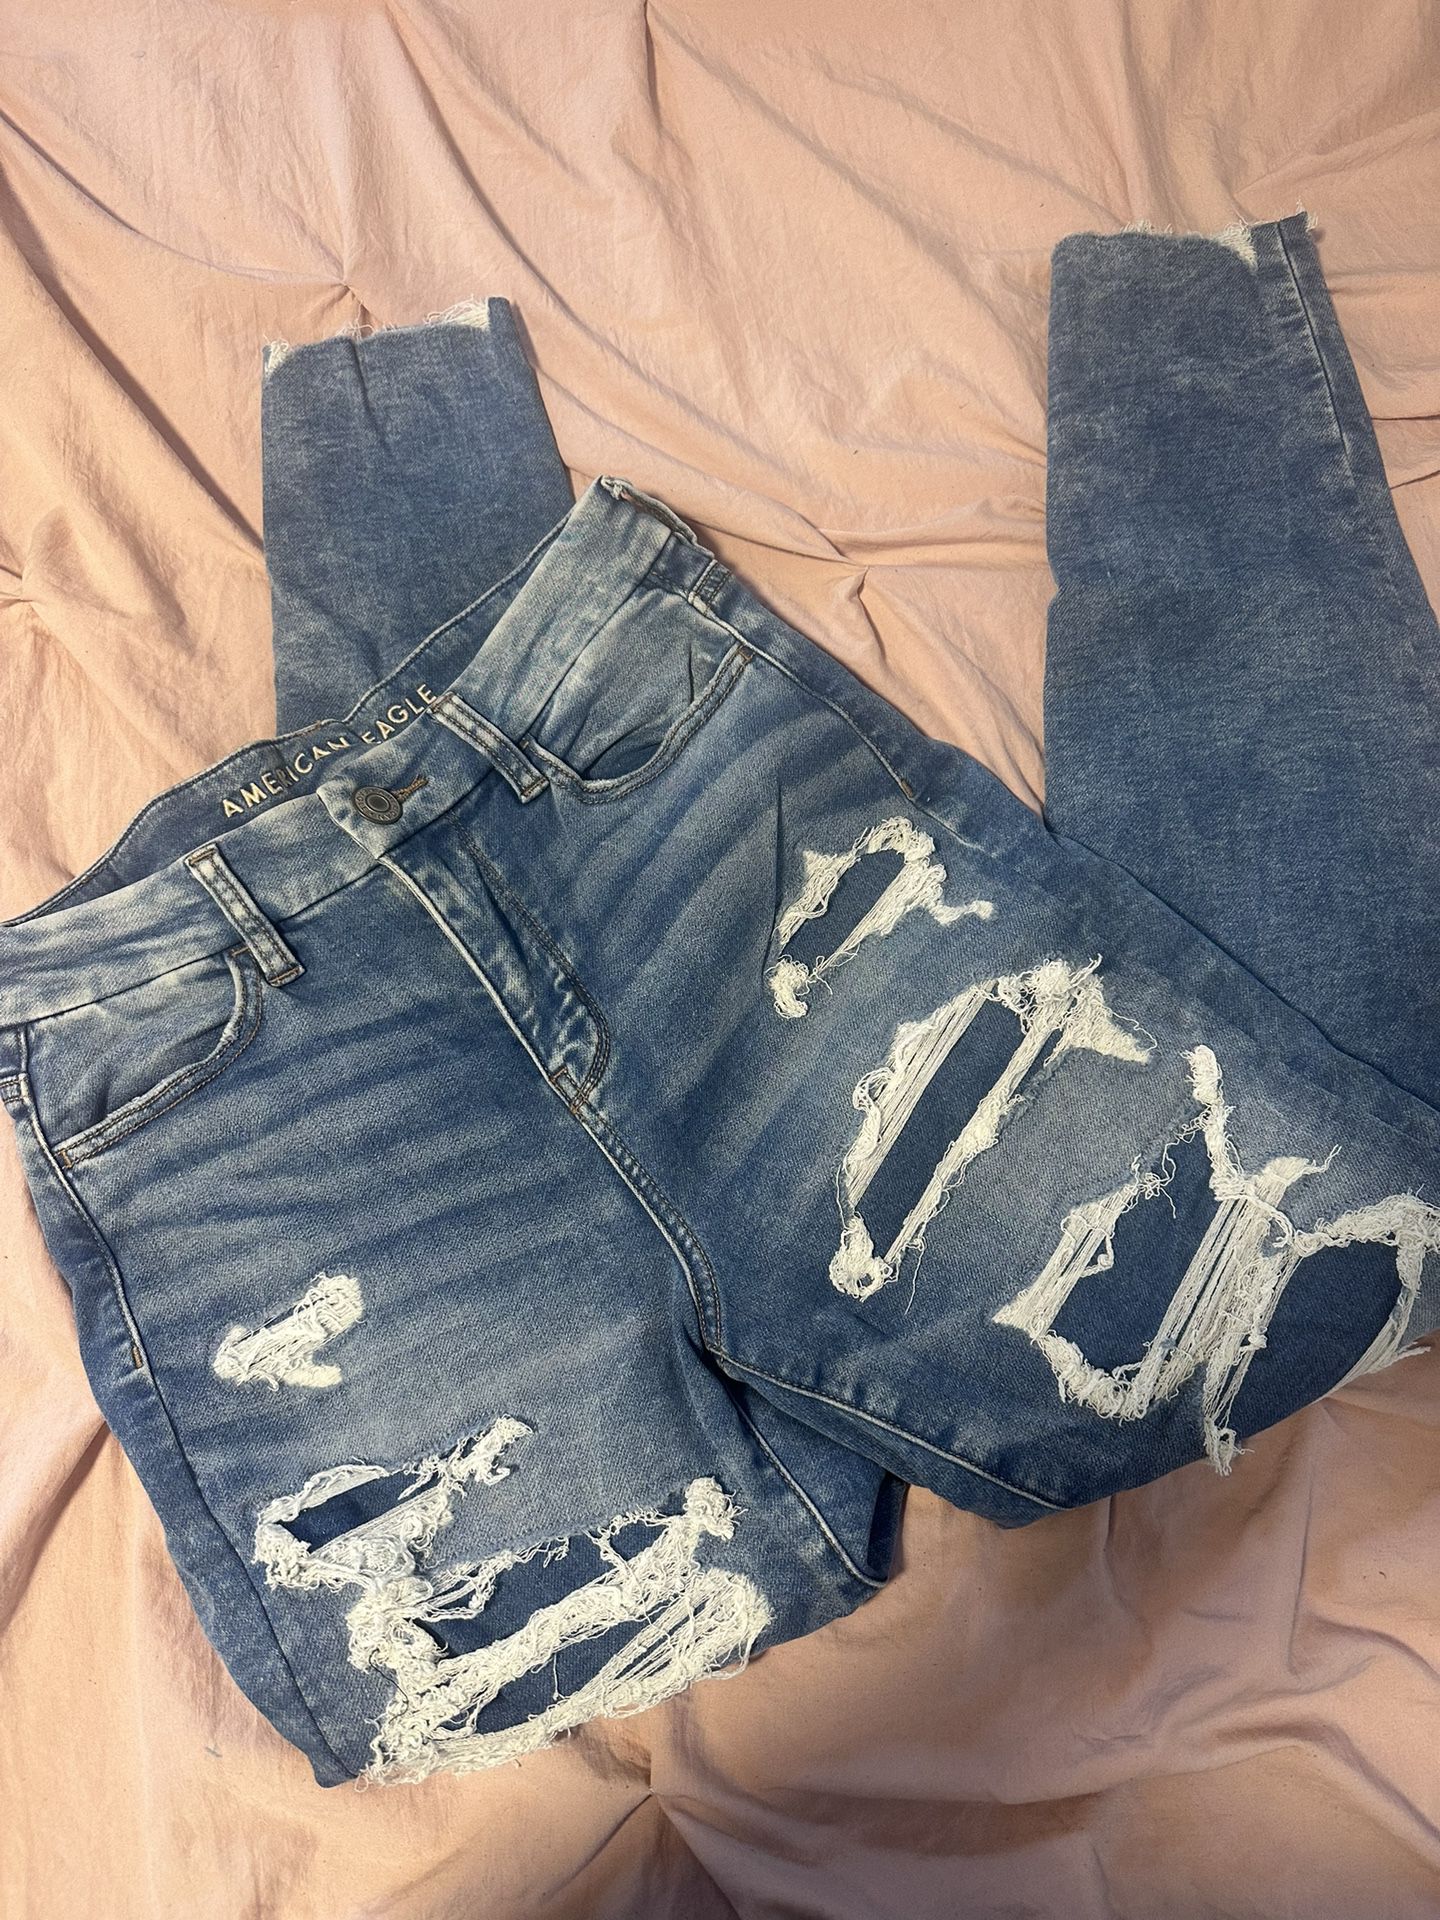 Jeans $20